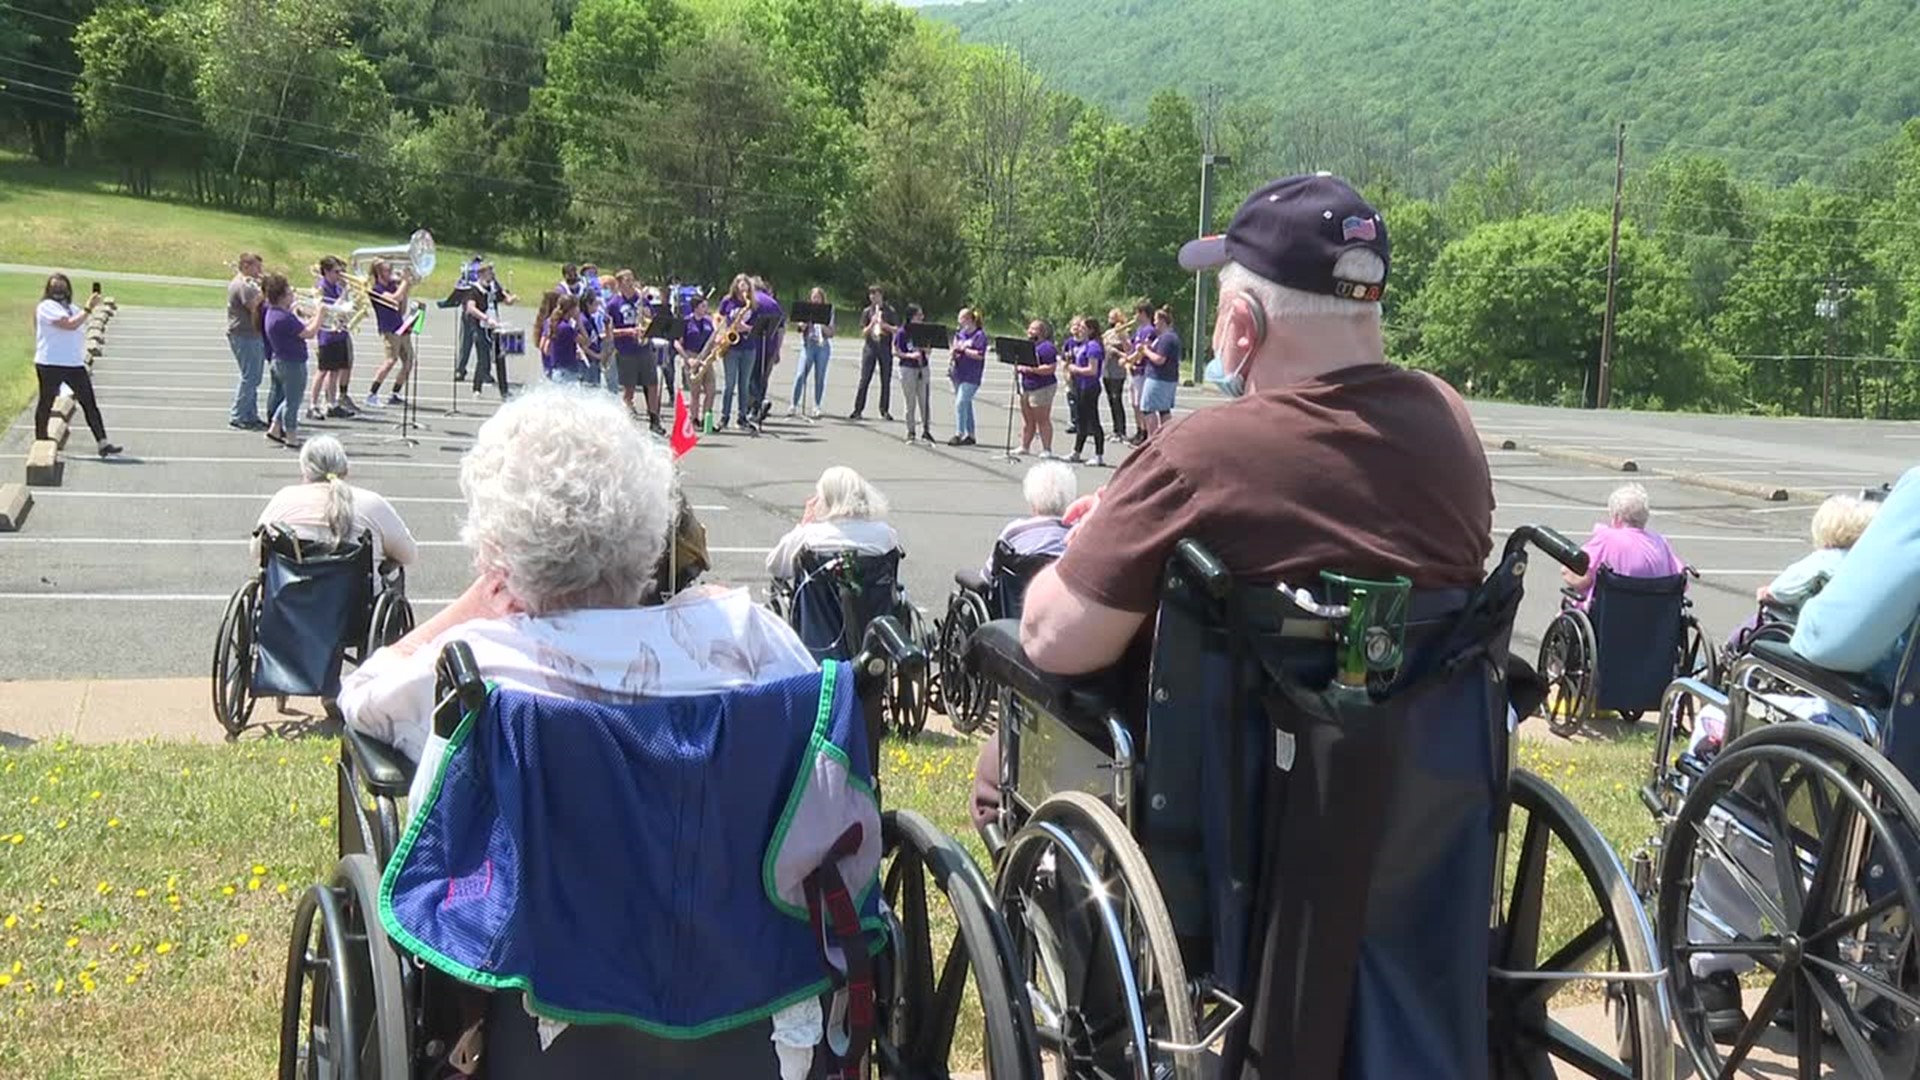 Members of the Shamokin High School marching band came out to show their support by performing music for the Mountain View Nursing and Rehabilitation Center.